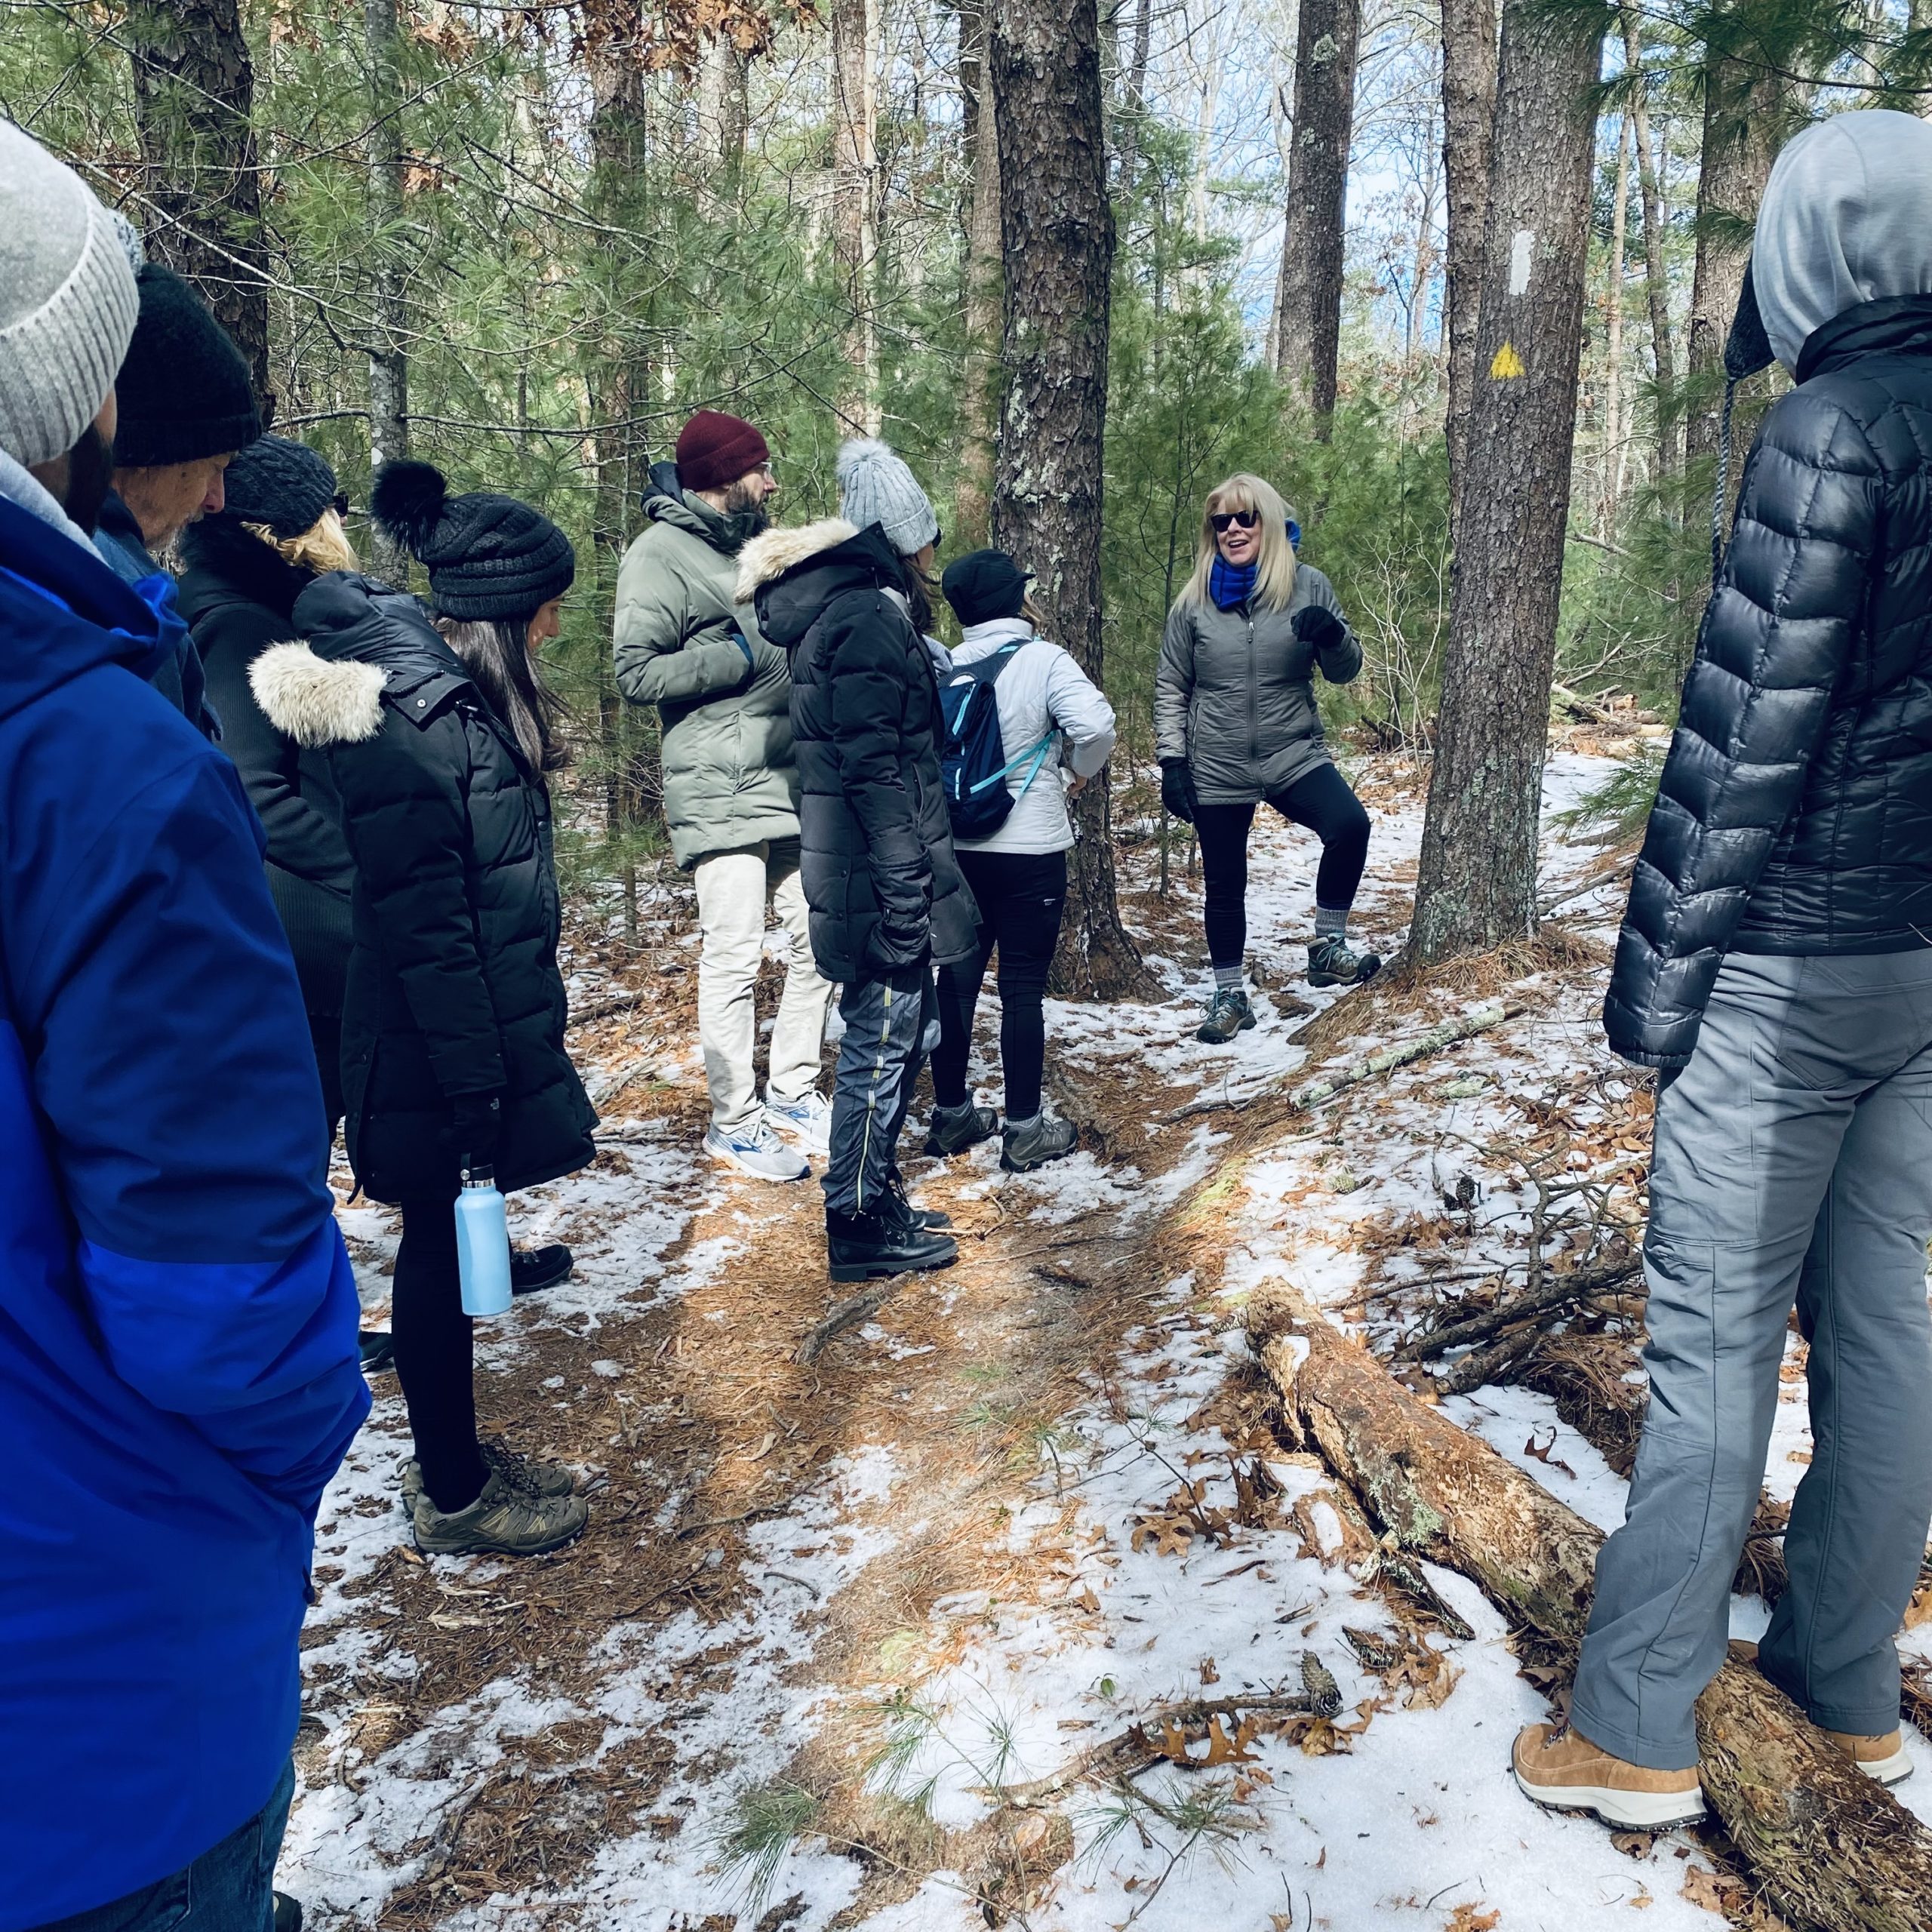 Laurie DeVito of the East Hampton Trails Preservation Society led a large group on a 5-mile hike through the Northwest Woods on Saturday, stopping periodically to explain points of interest.